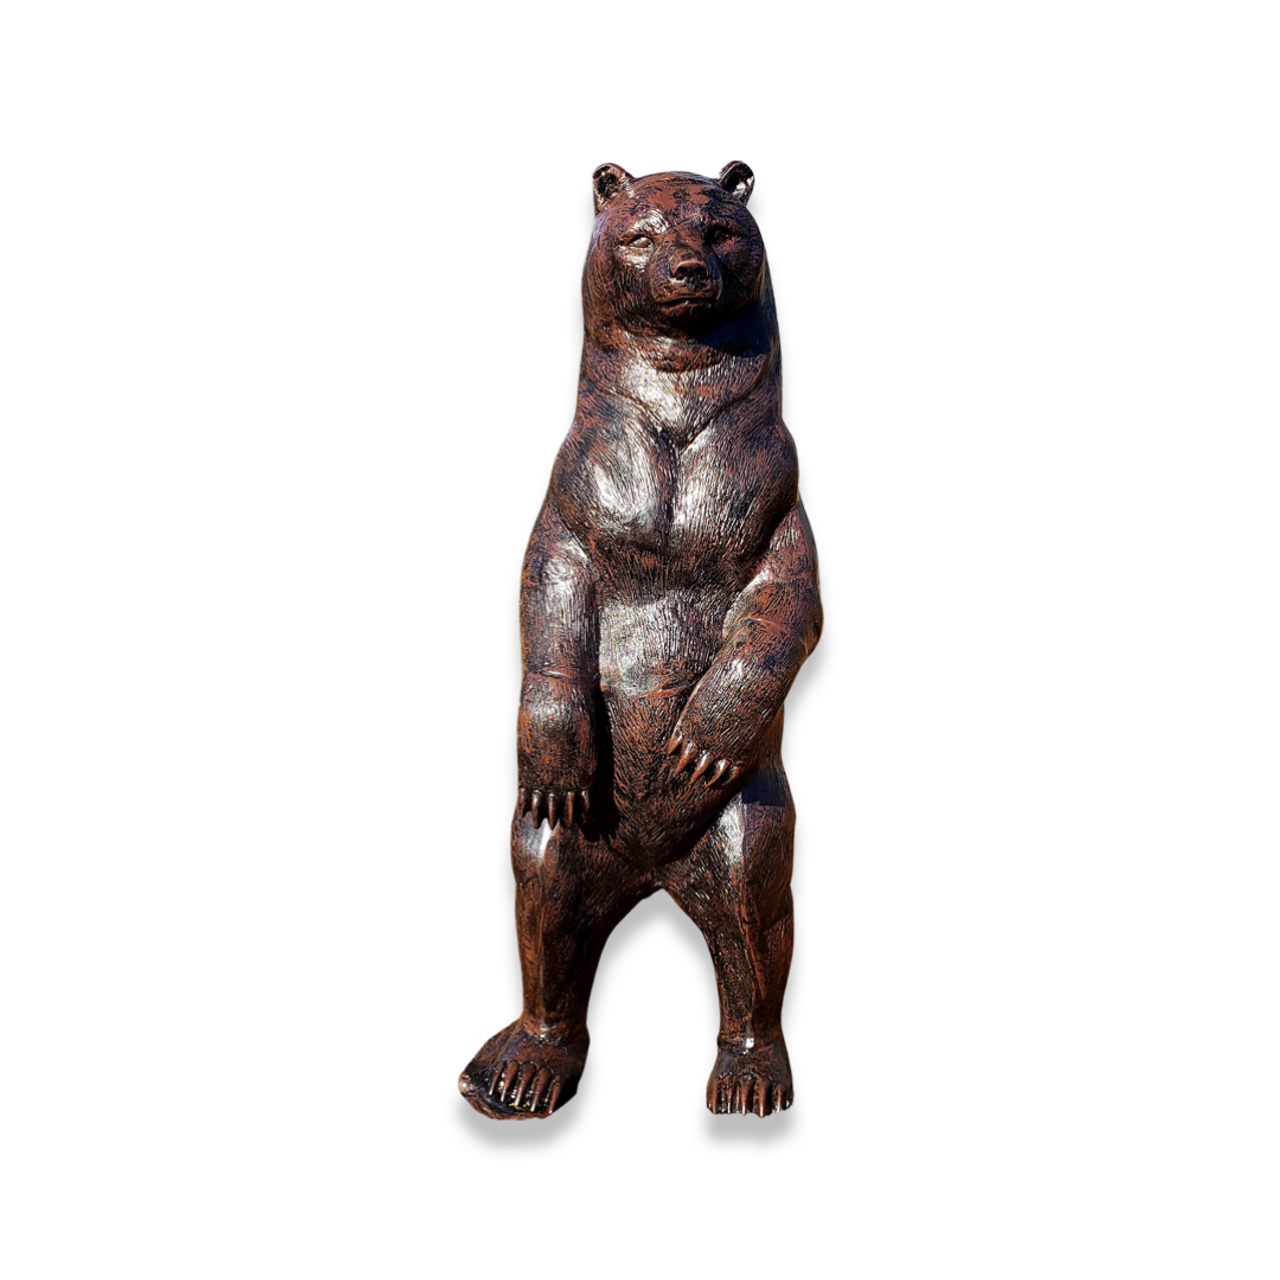 grizzly bear statues